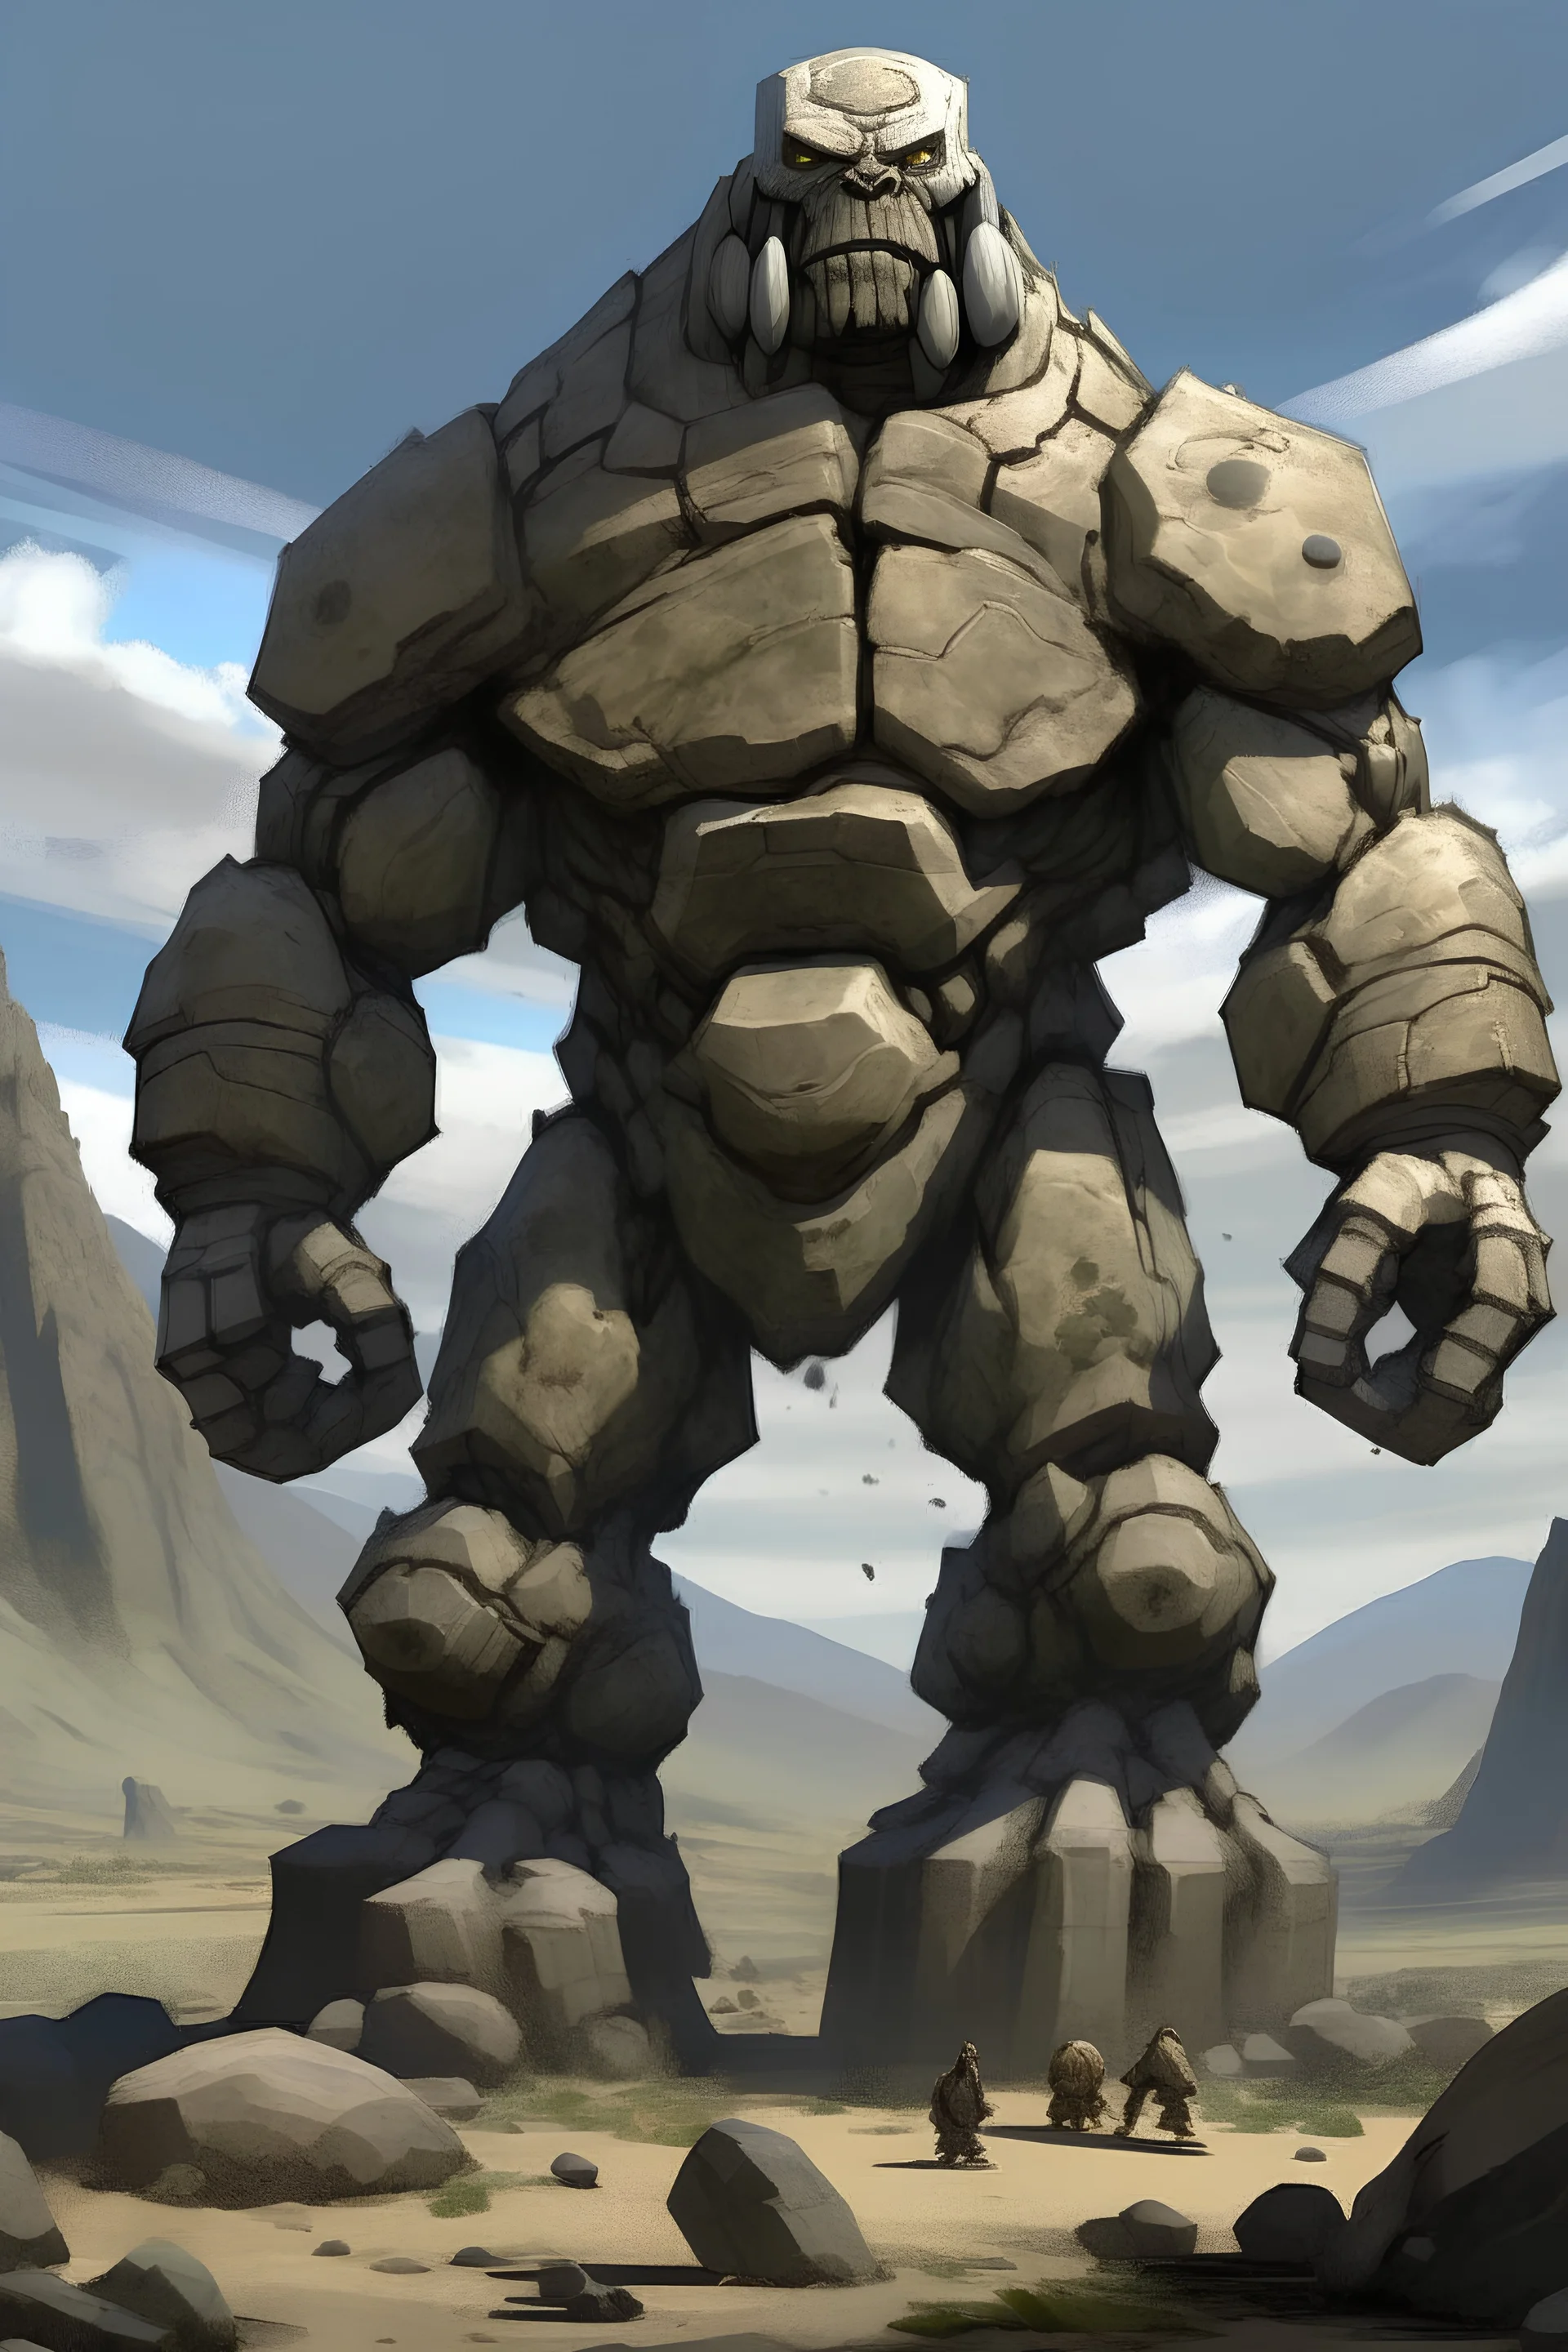 Stone Golem: A colossal humanoid figure made entirely of boulders, the Stone Golem roams near mountains in the desert. Standing around 10 meters tall, it possesses formidable attacks such as ground-smashing to blind enemies, stomping, and emitting a screech that damages hearing. Stone Golems drop stones upon defeat.